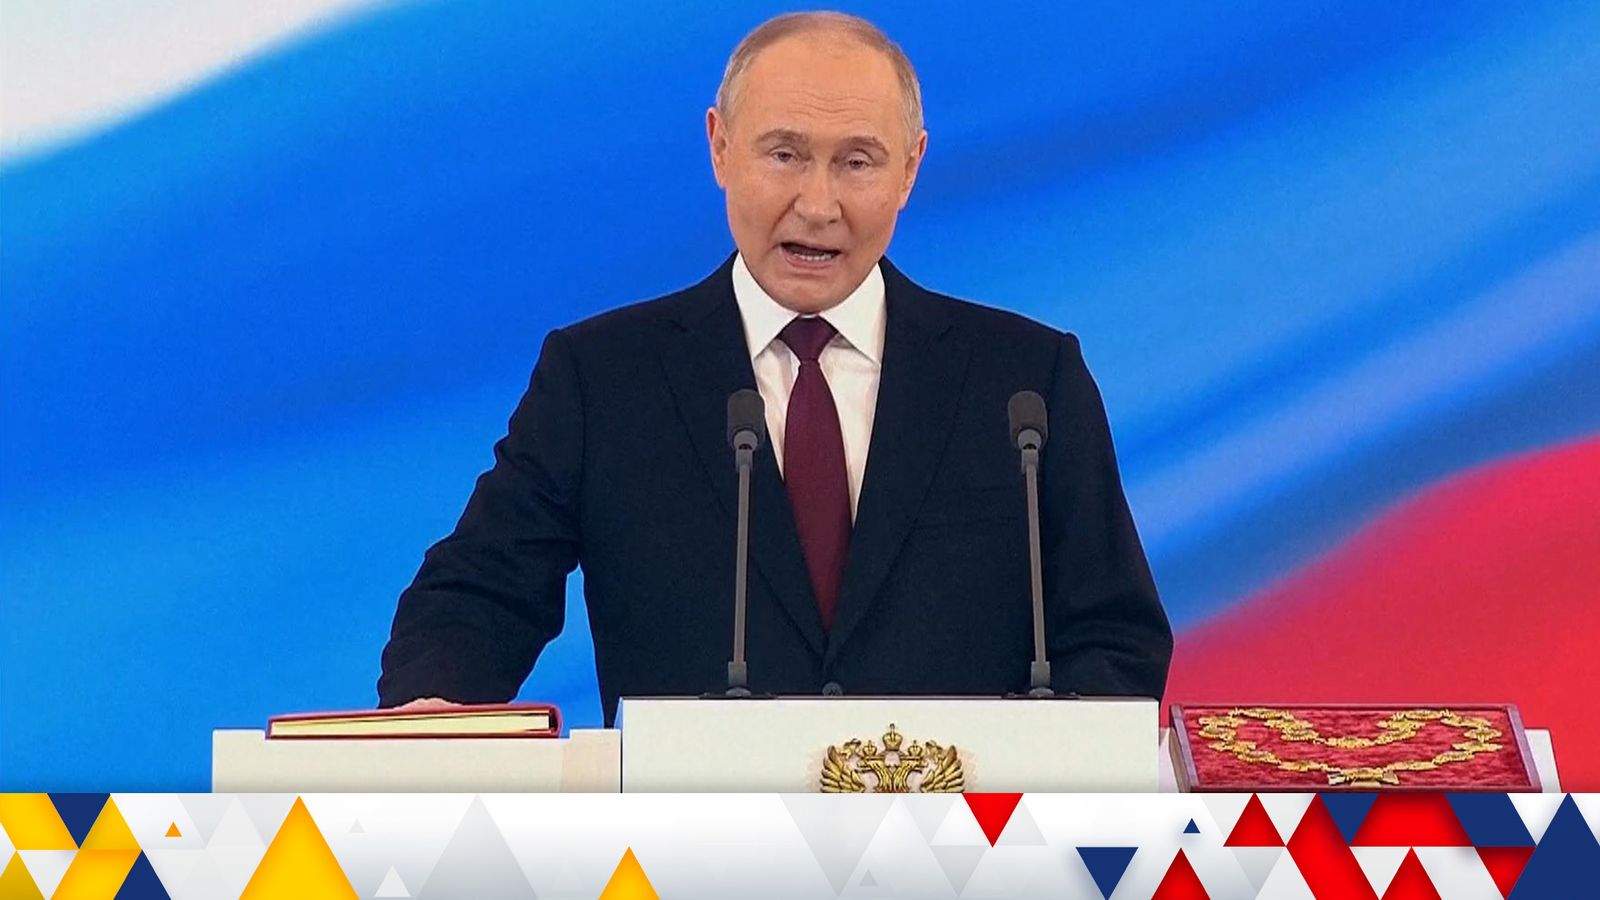 Putin’s Inauguration Speech Raises Concerns for the West amid Plot to Assassinate Zelenskyy Thwarted in Ongoing Ukraine-Russia Conflict